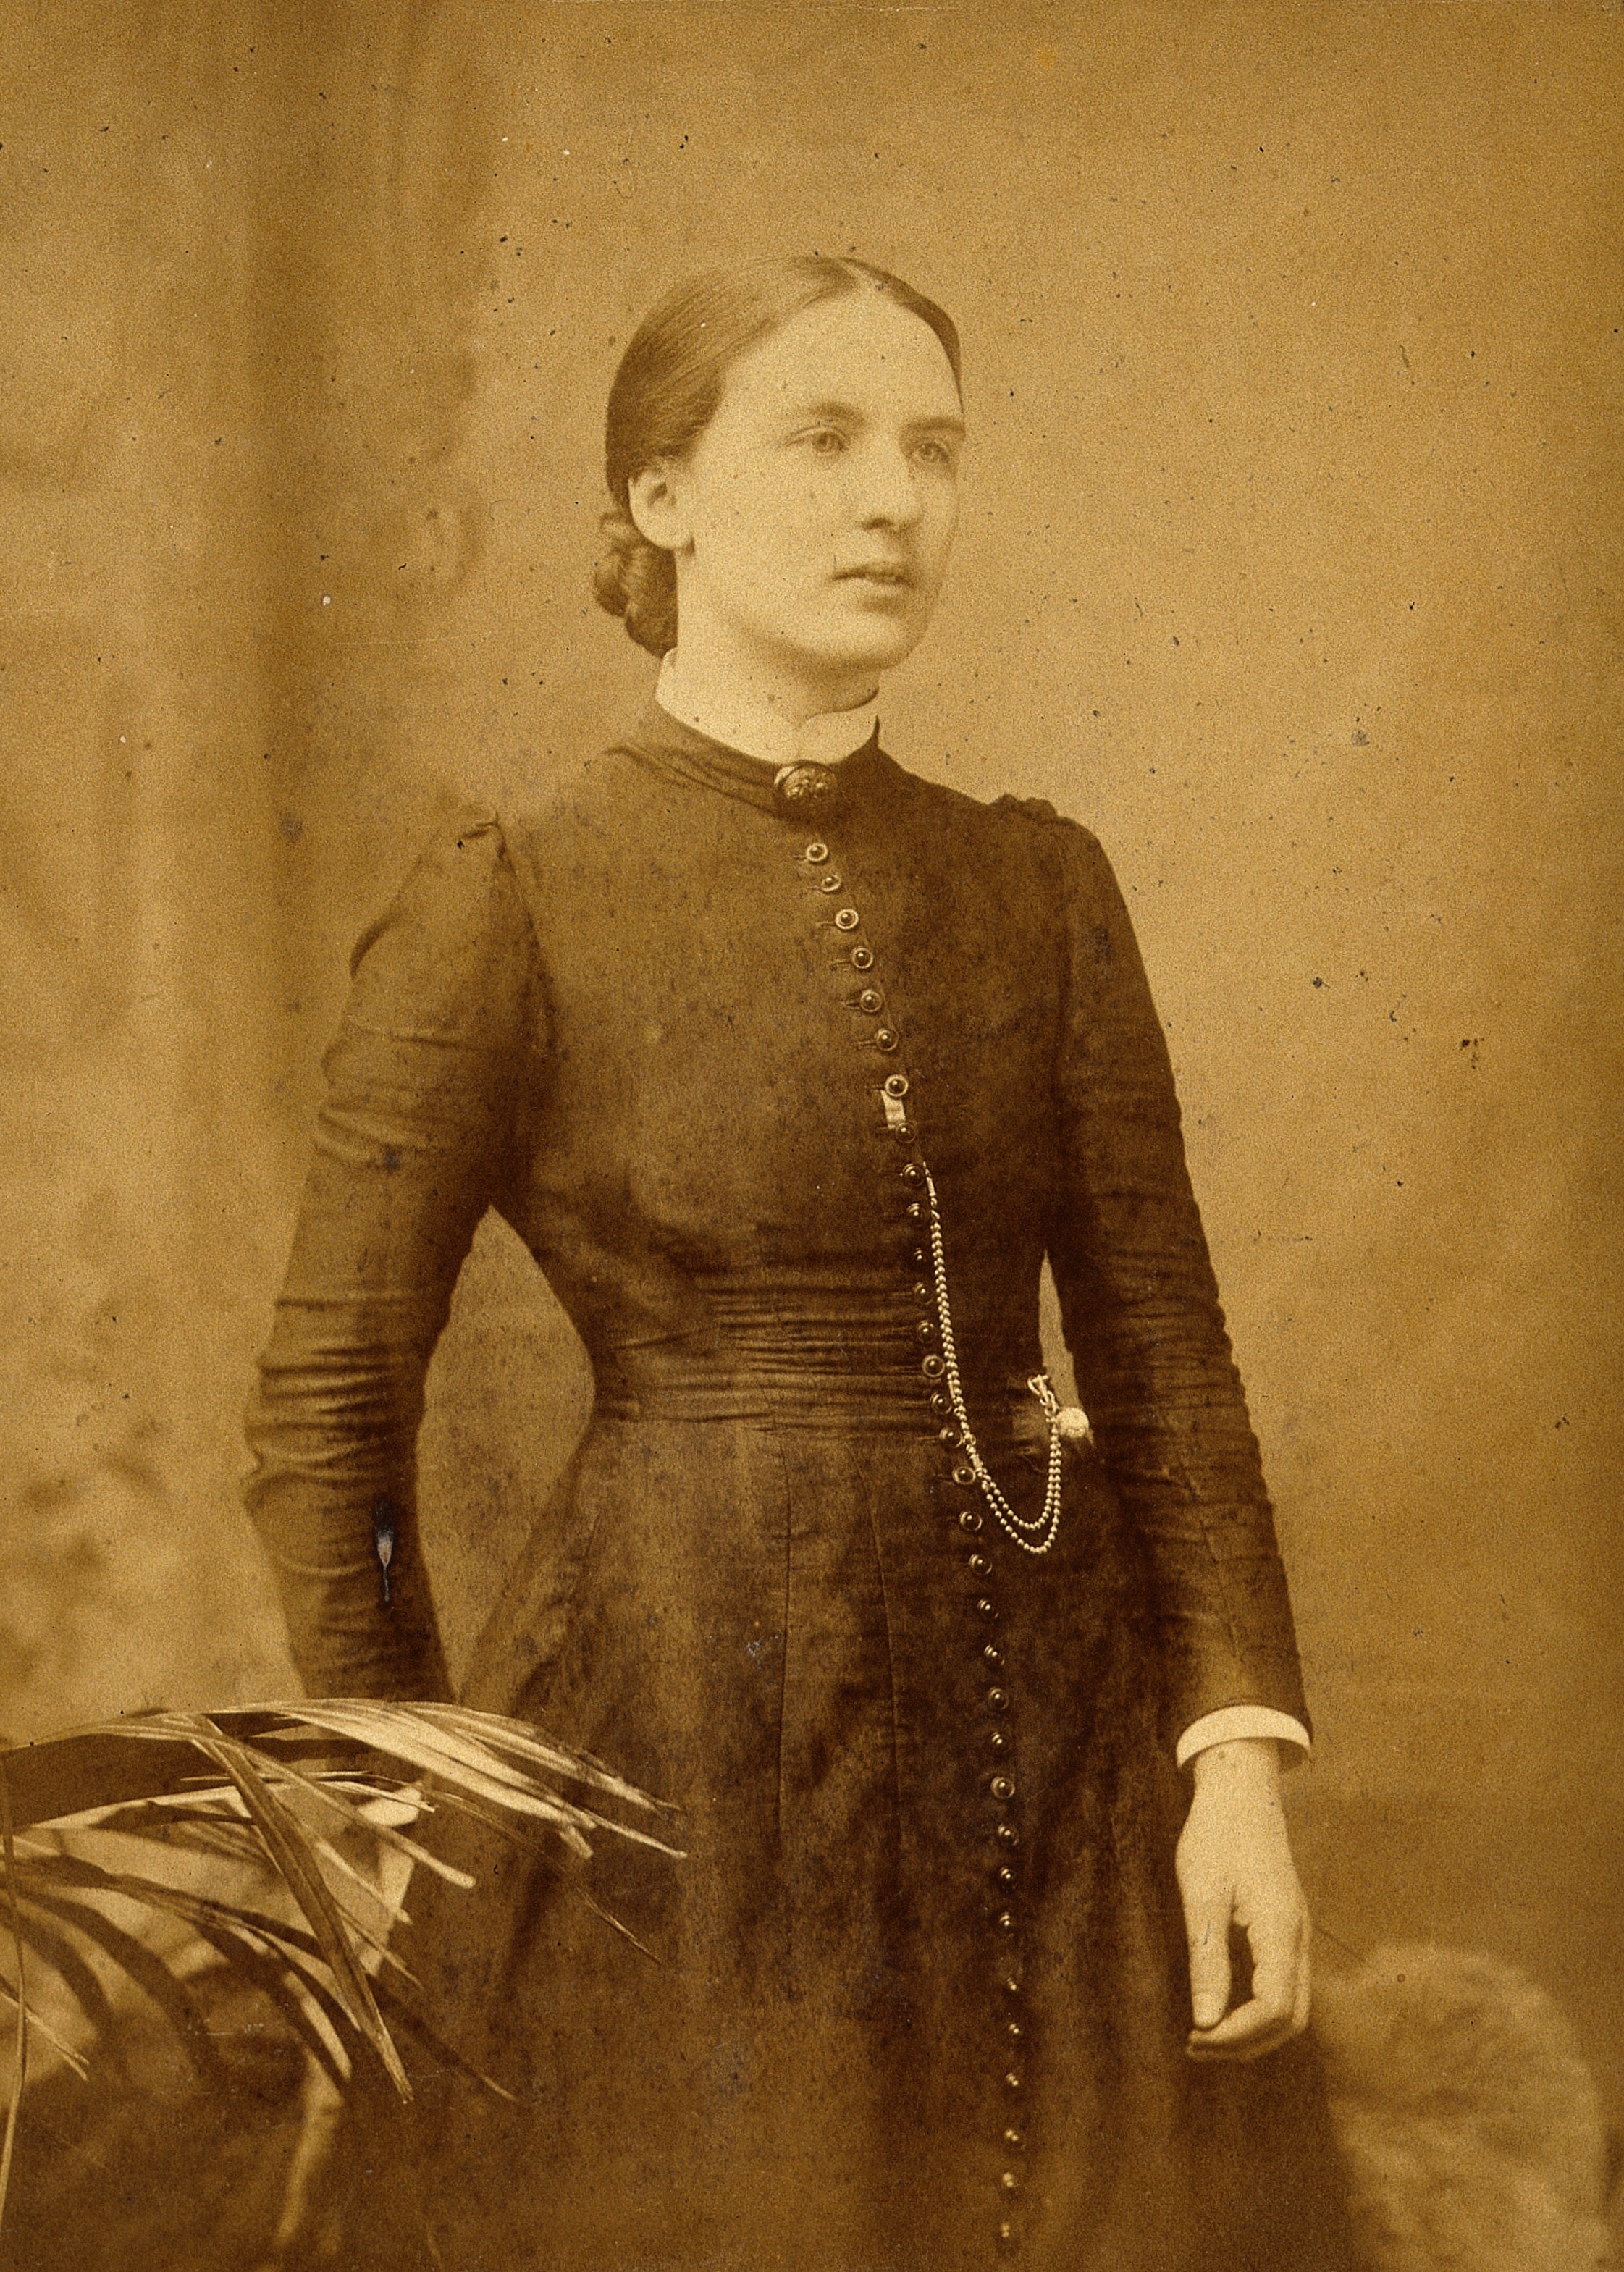 Unidentified woman. Photograph by Boning & Small. Wellcome V0028347